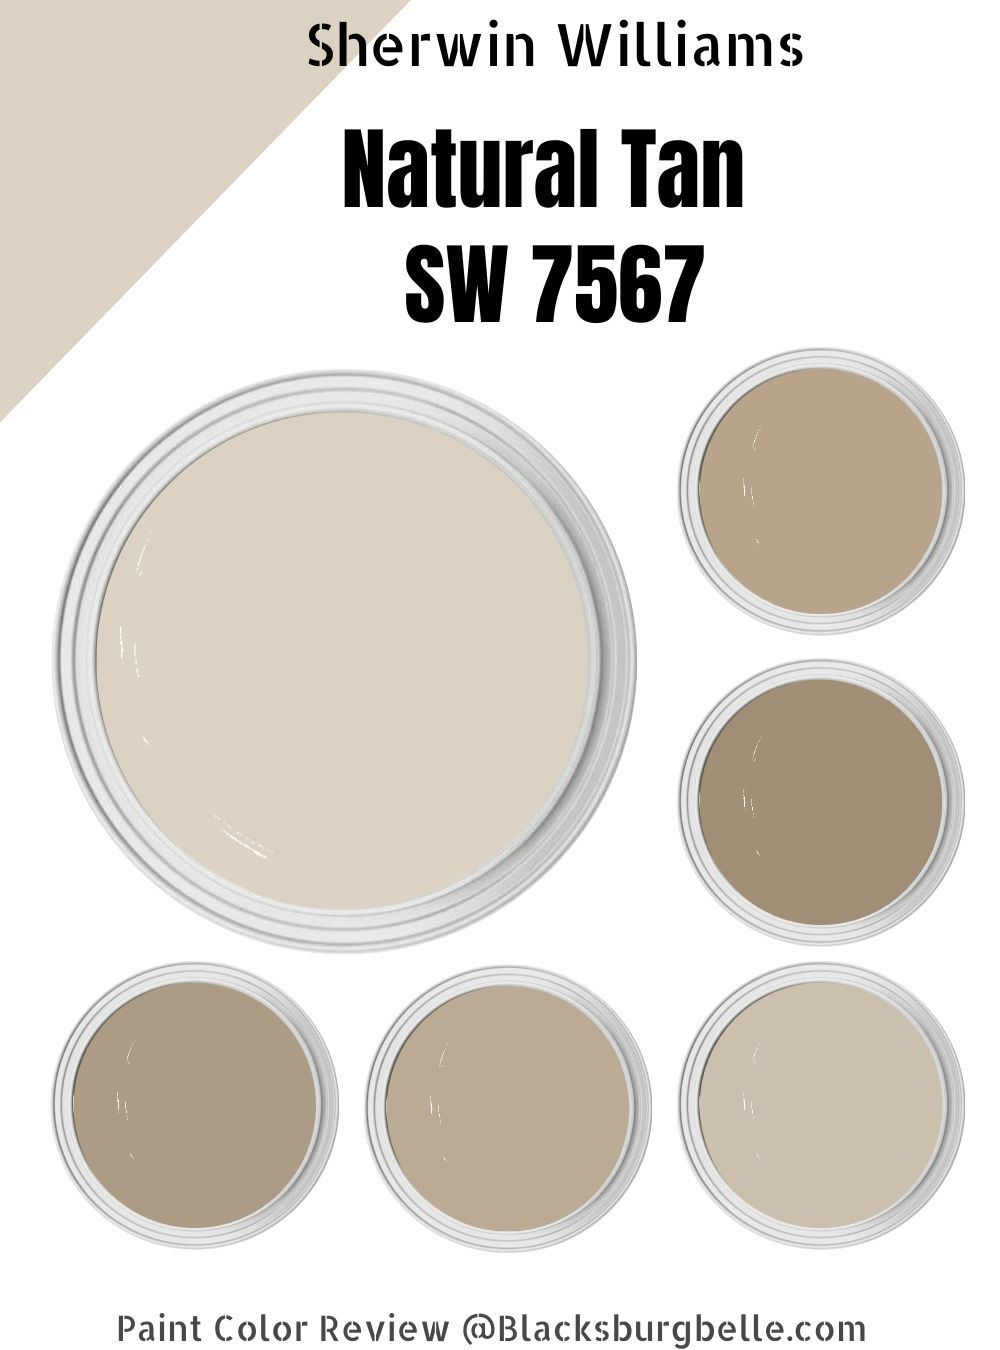 Sherwin Williams Natural Tan (SW 7567) Paint Color Review